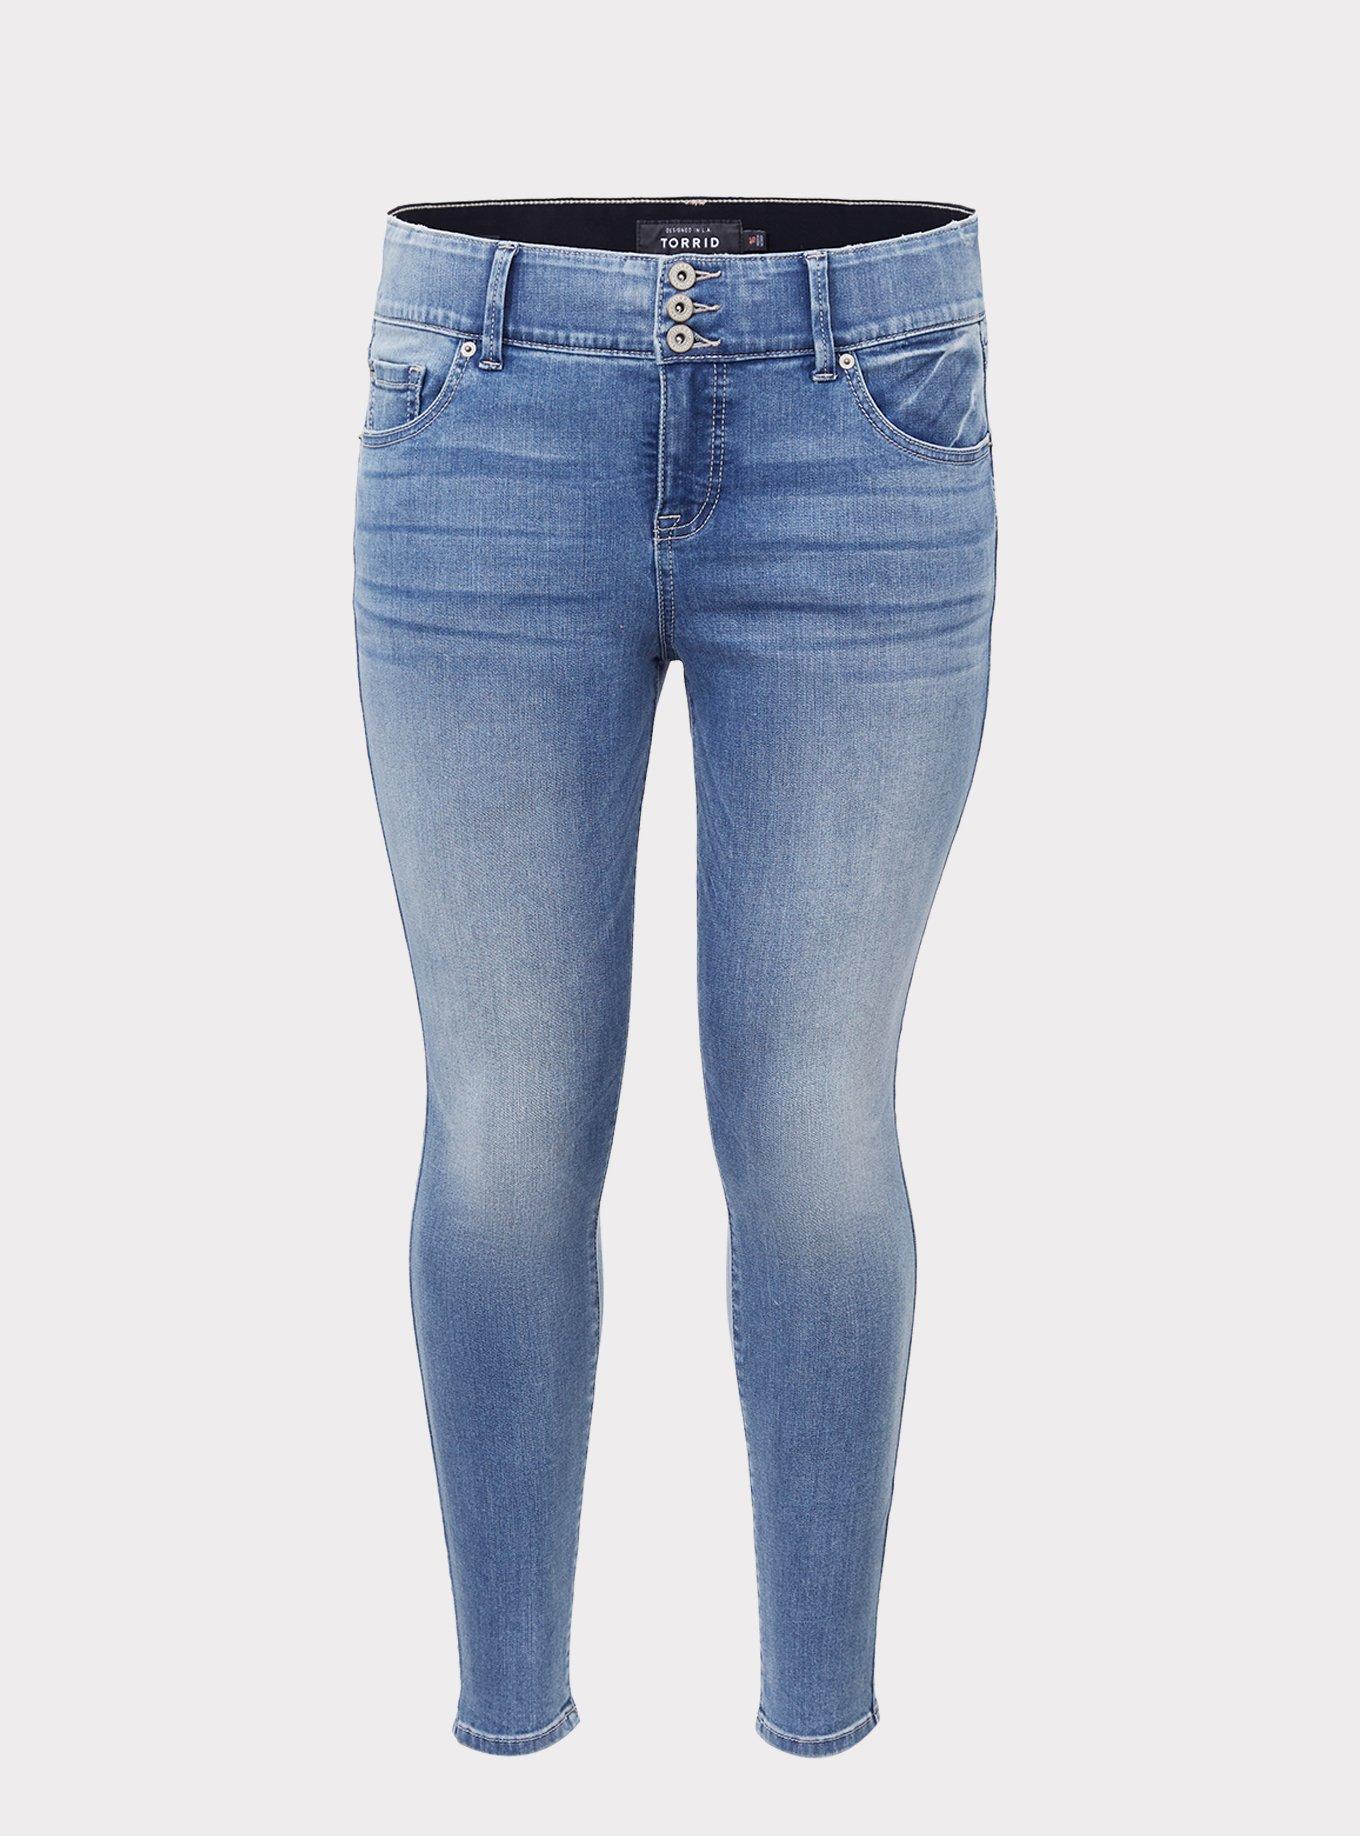 Exact Clothing - Did you hear? Our girl's jeggings are